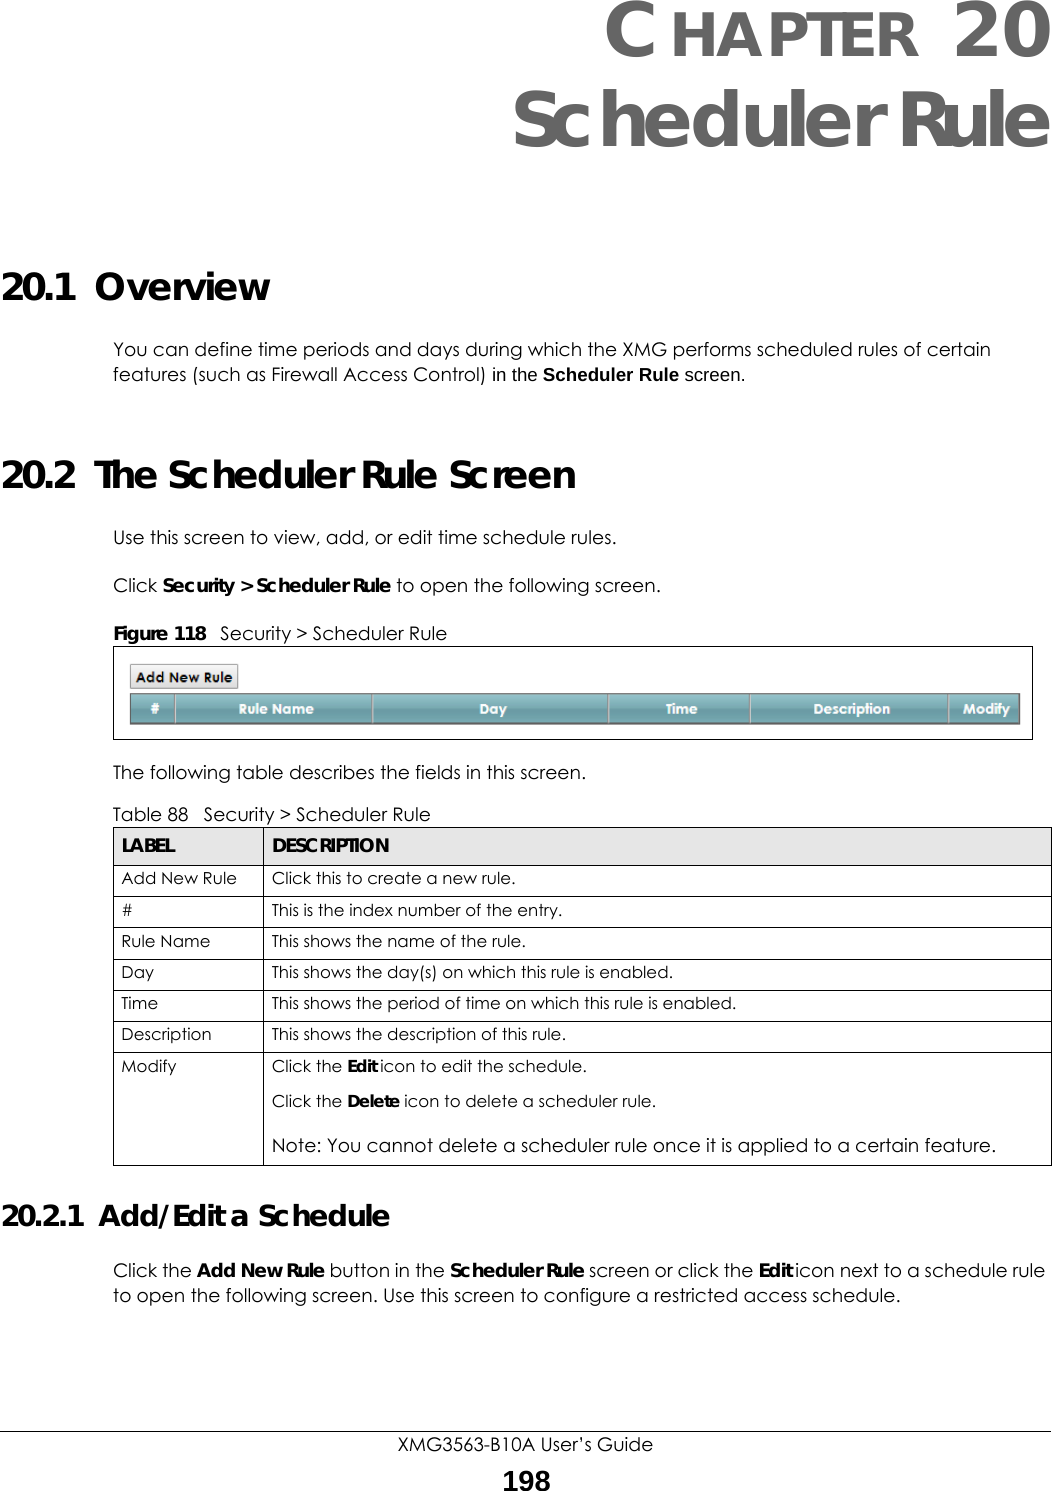 XMG3563-B10A User’s Guide198CHAPTER 20Scheduler Rule20.1  OverviewYou can define time periods and days during which the XMG performs scheduled rules of certain features (such as Firewall Access Control) in the Scheduler Rule screen. 20.2  The Scheduler Rule ScreenUse this screen to view, add, or edit time schedule rules.Click Security &gt; Scheduler Rule to open the following screen. Figure 118   Security &gt; Scheduler Rule The following table describes the fields in this screen. 20.2.1  Add/Edit a ScheduleClick the Add New Rule button in the Scheduler Rule screen or click the Edit icon next to a schedule rule to open the following screen. Use this screen to configure a restricted access schedule. Table 88   Security &gt; Scheduler RuleLABEL DESCRIPTIONAdd New Rule Click this to create a new rule.#This is the index number of the entry.Rule Name This shows the name of the rule.Day This shows the day(s) on which this rule is enabled.Time This shows the period of time on which this rule is enabled.Description This shows the description of this rule.Modify Click the Edit icon to edit the schedule.Click the Delete icon to delete a scheduler rule.Note: You cannot delete a scheduler rule once it is applied to a certain feature.